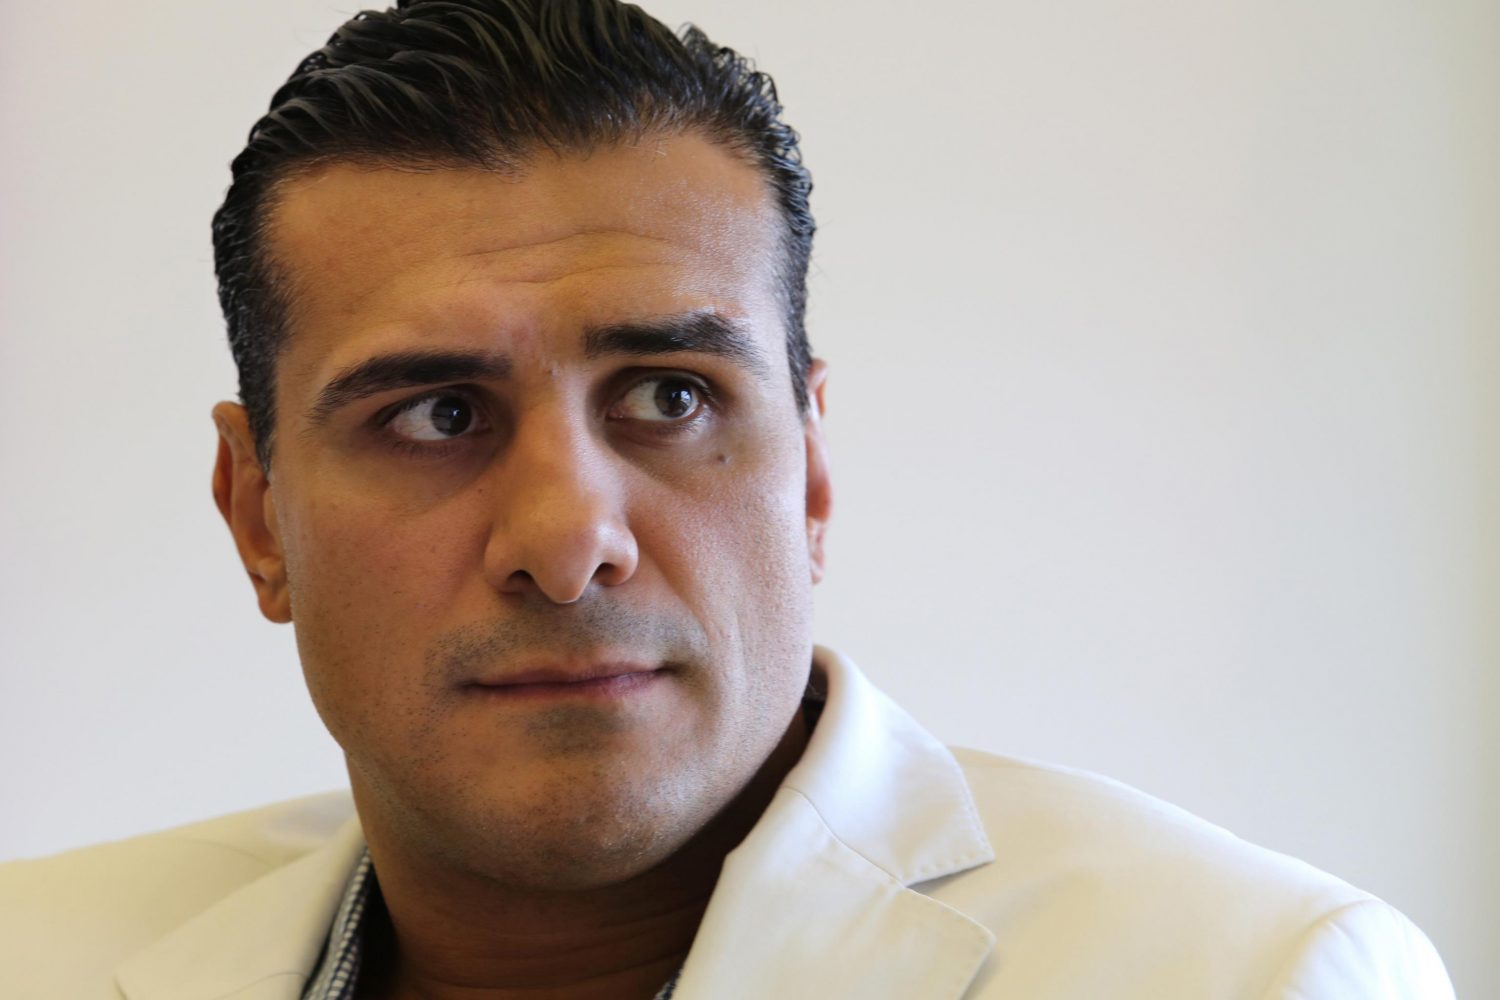 Ex-WWE Star Alberto Del Rio Charged With Kidnapping, Sexual Assault